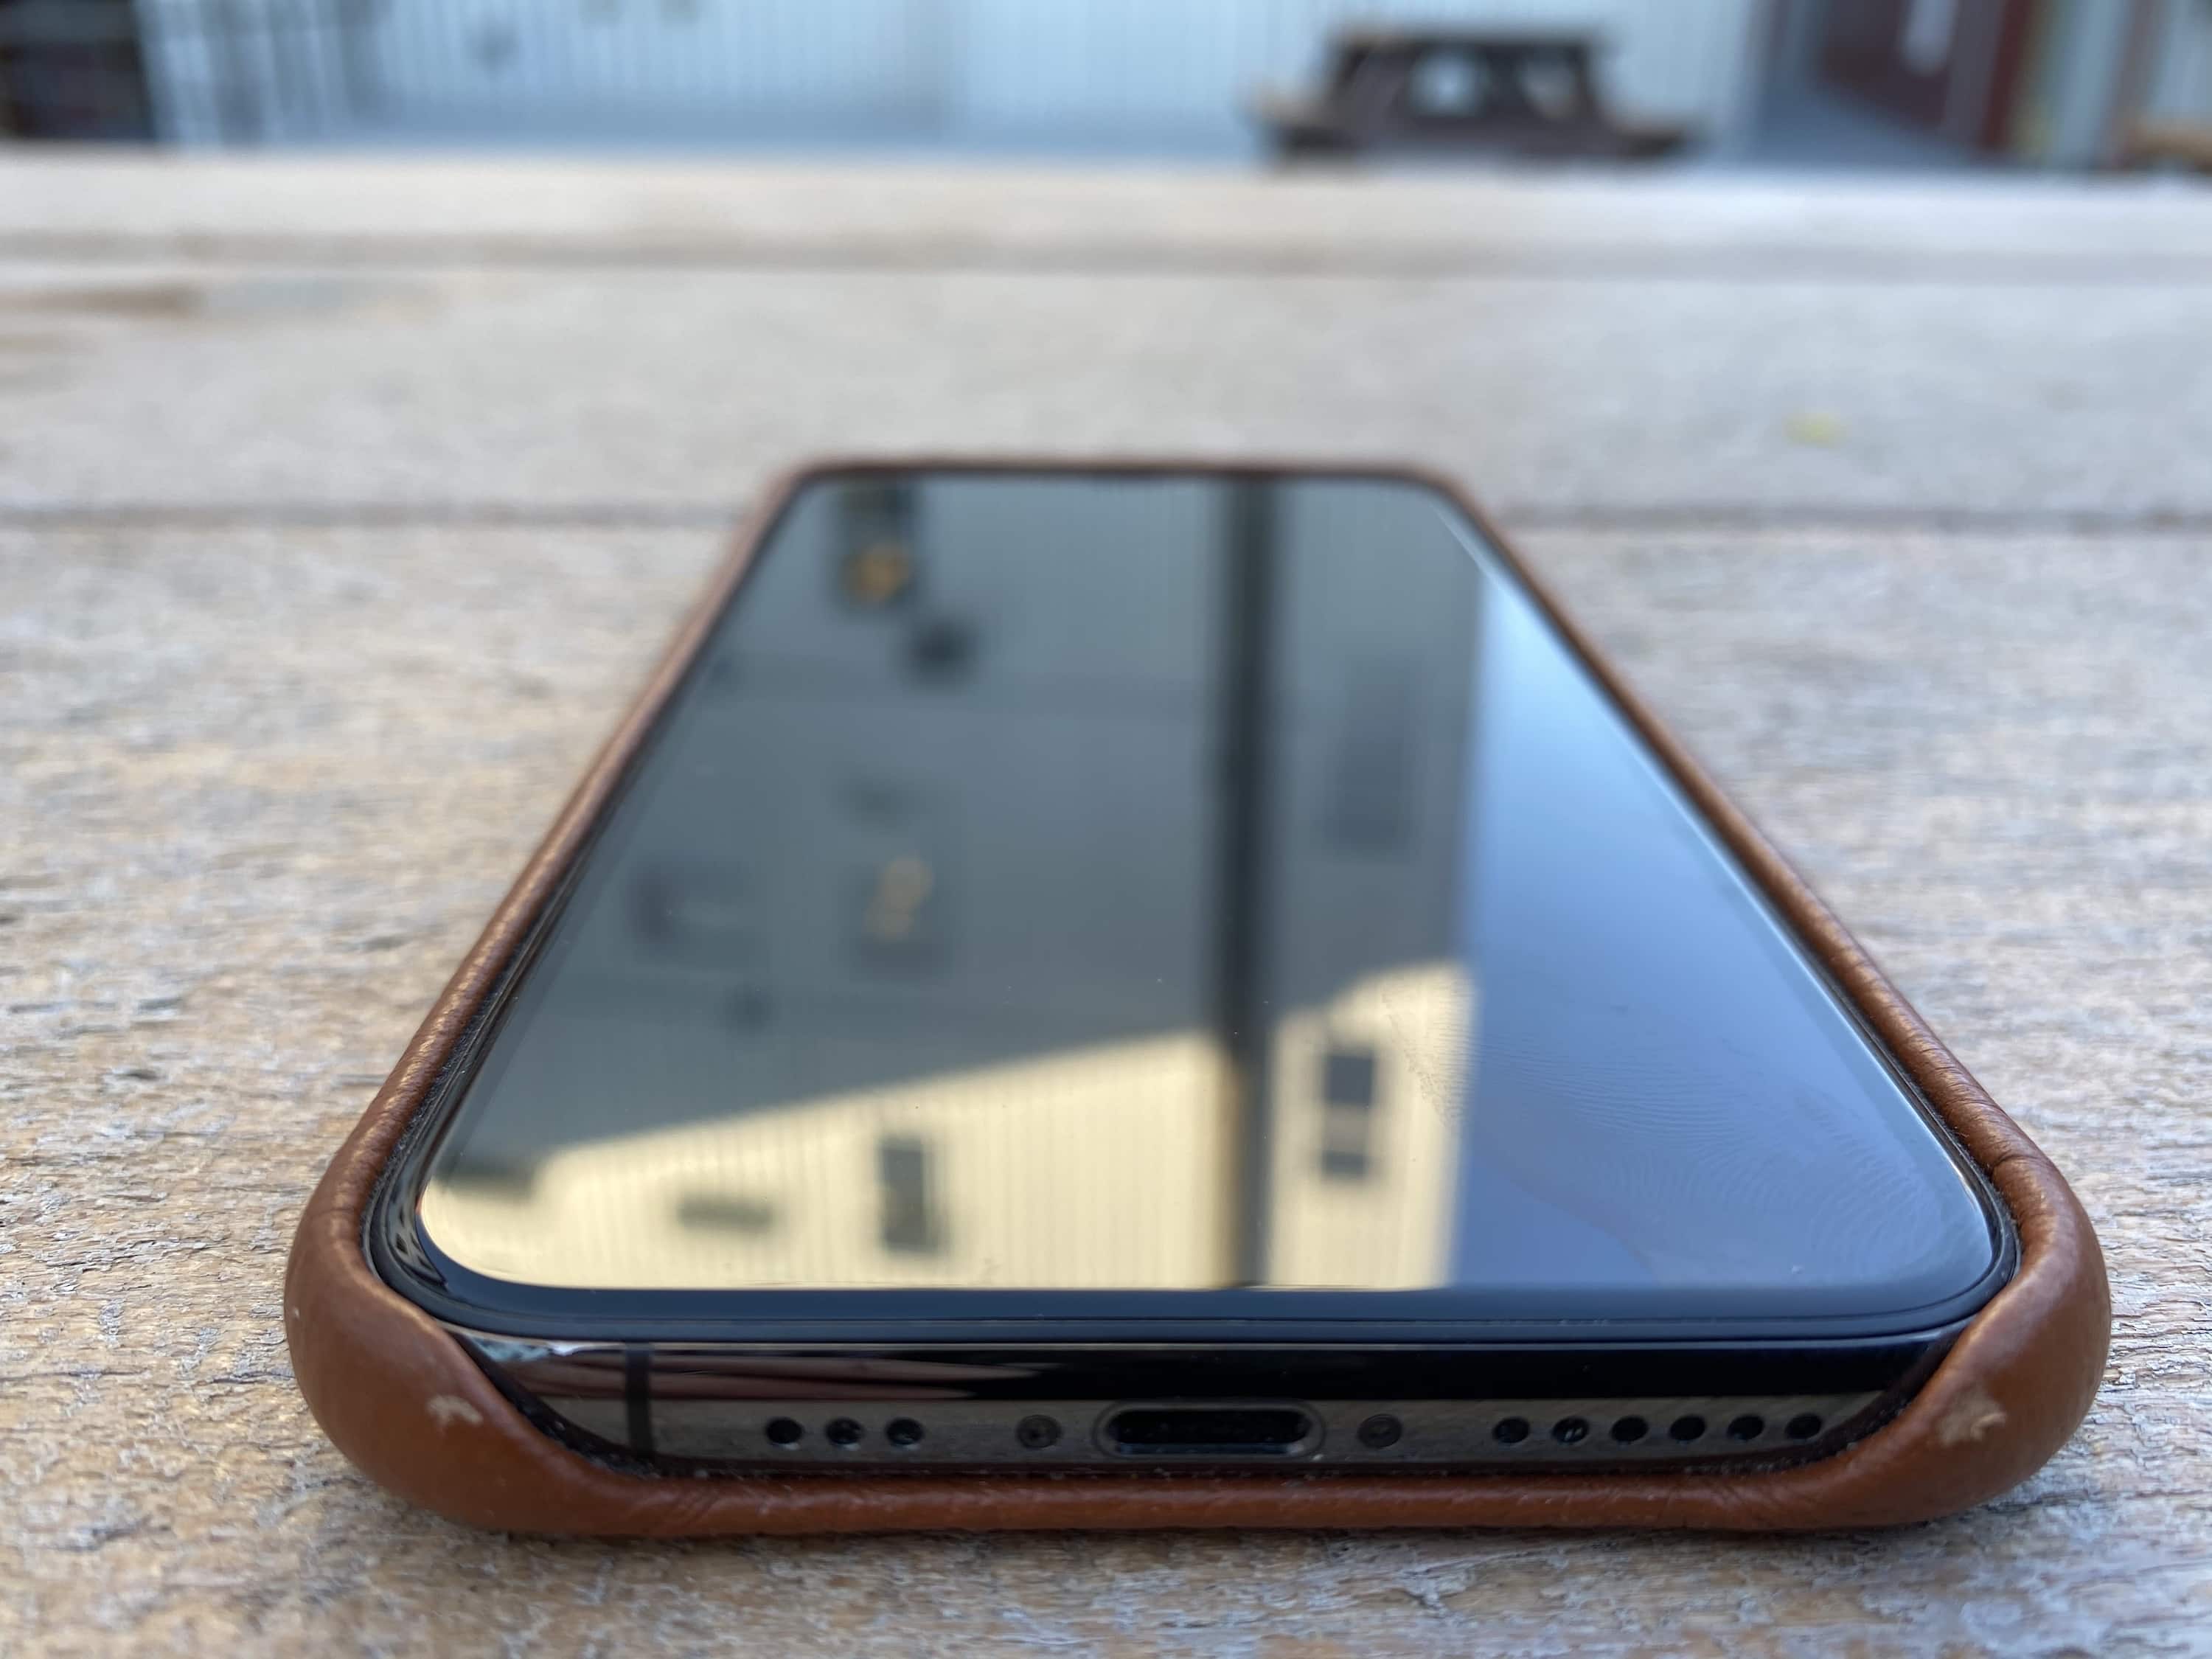 The best leather cases for iPhone 11 and iPhone 11 Pro - 9to5Mac